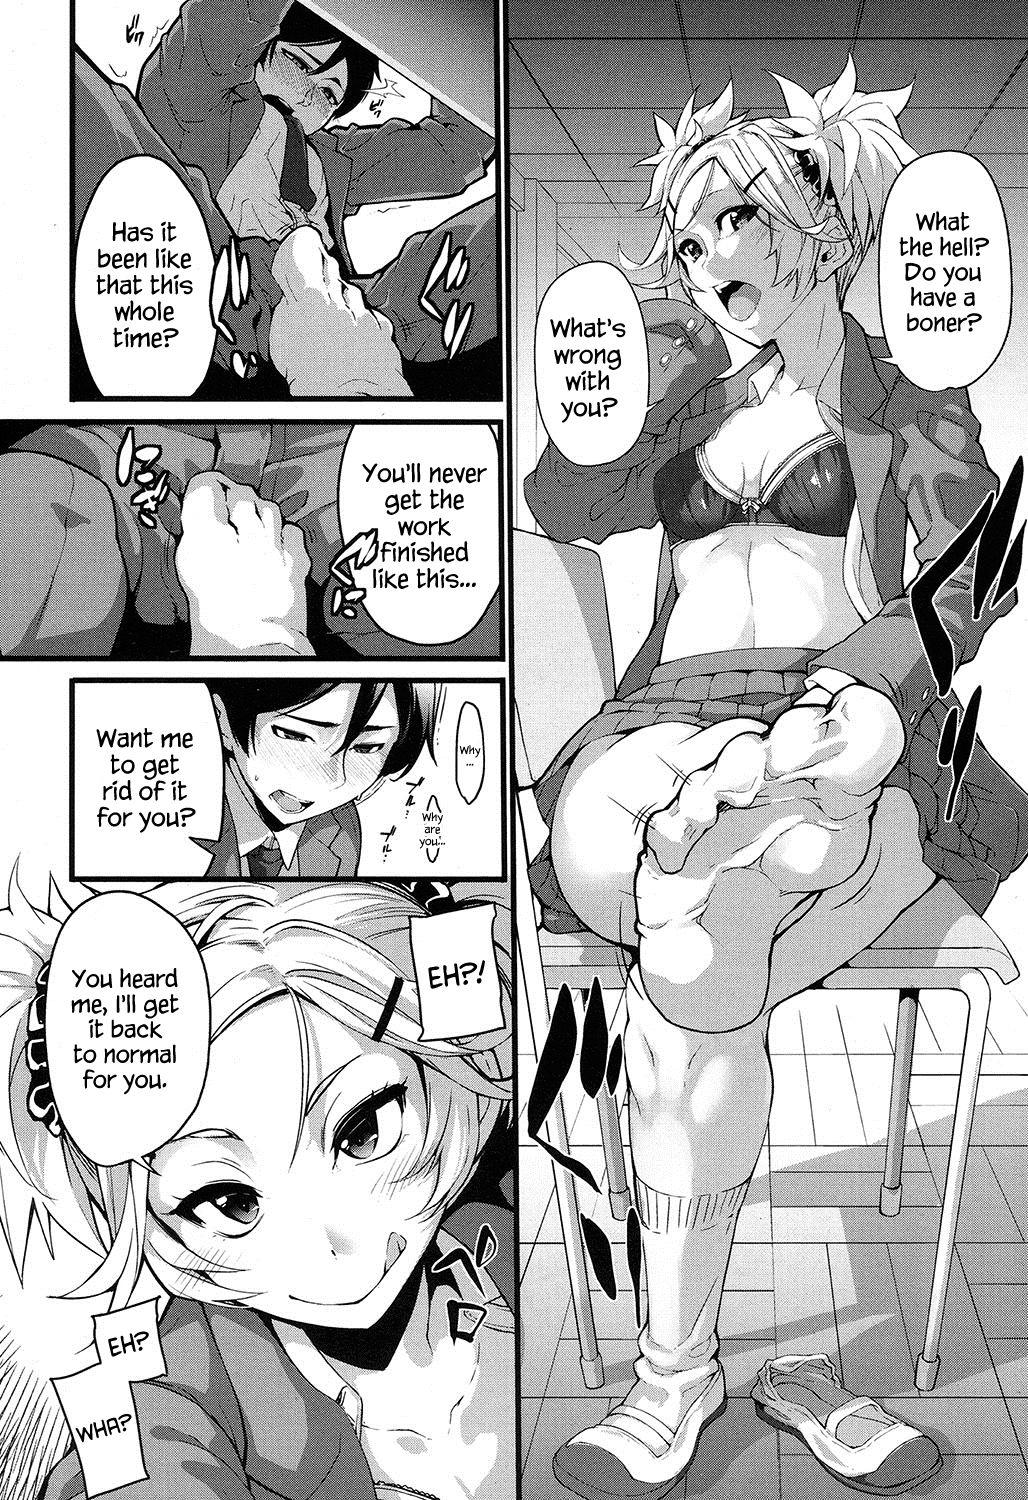 Mukouhara-san is A Little Distracting 9